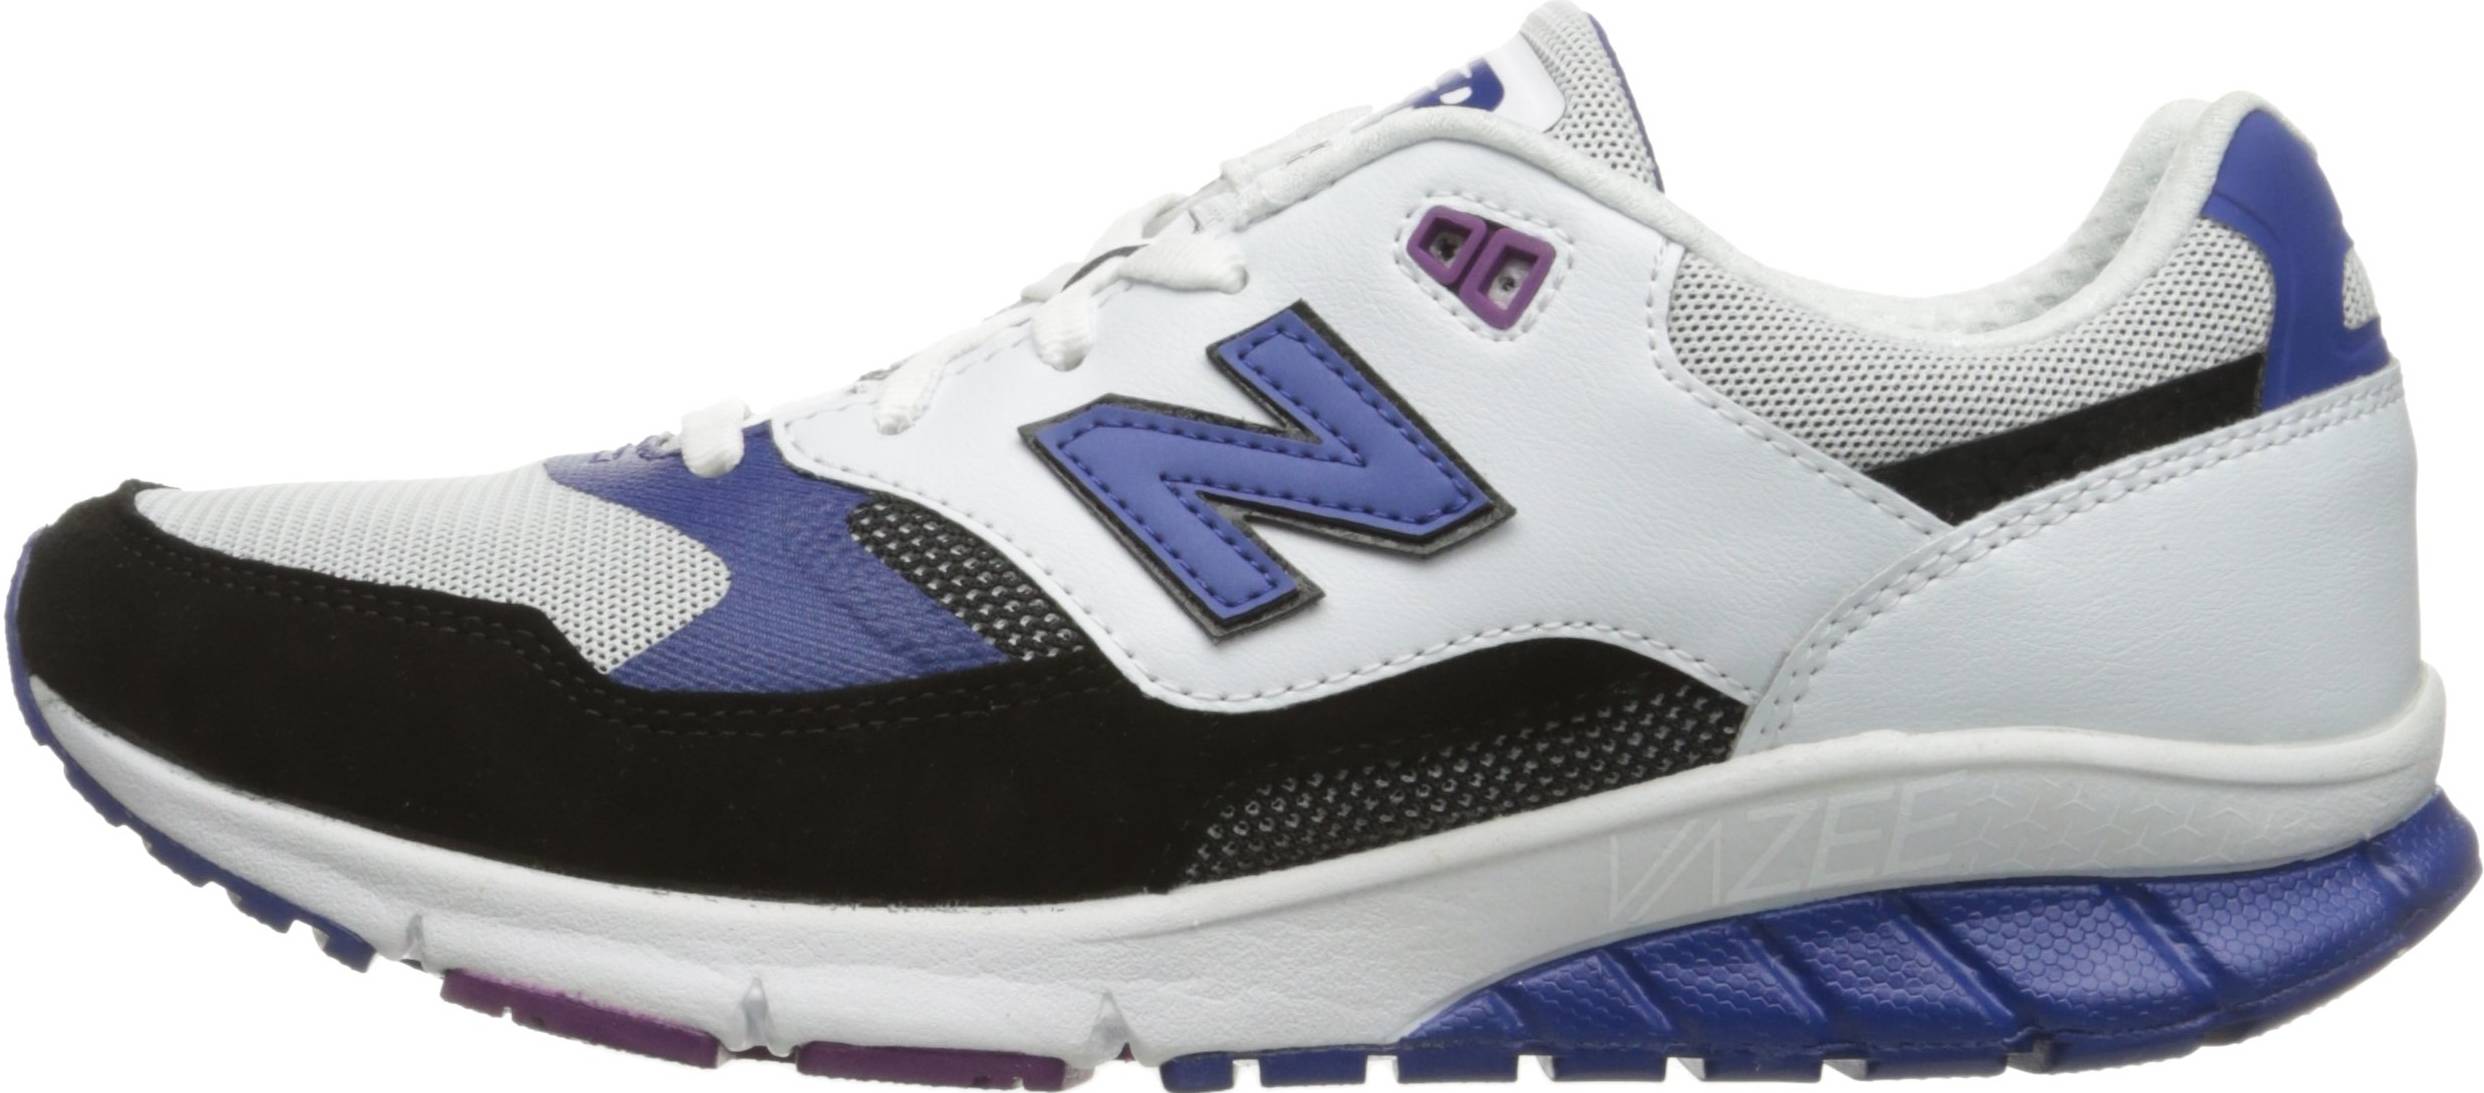 New Balance 530 Vazee sneakers in 3 